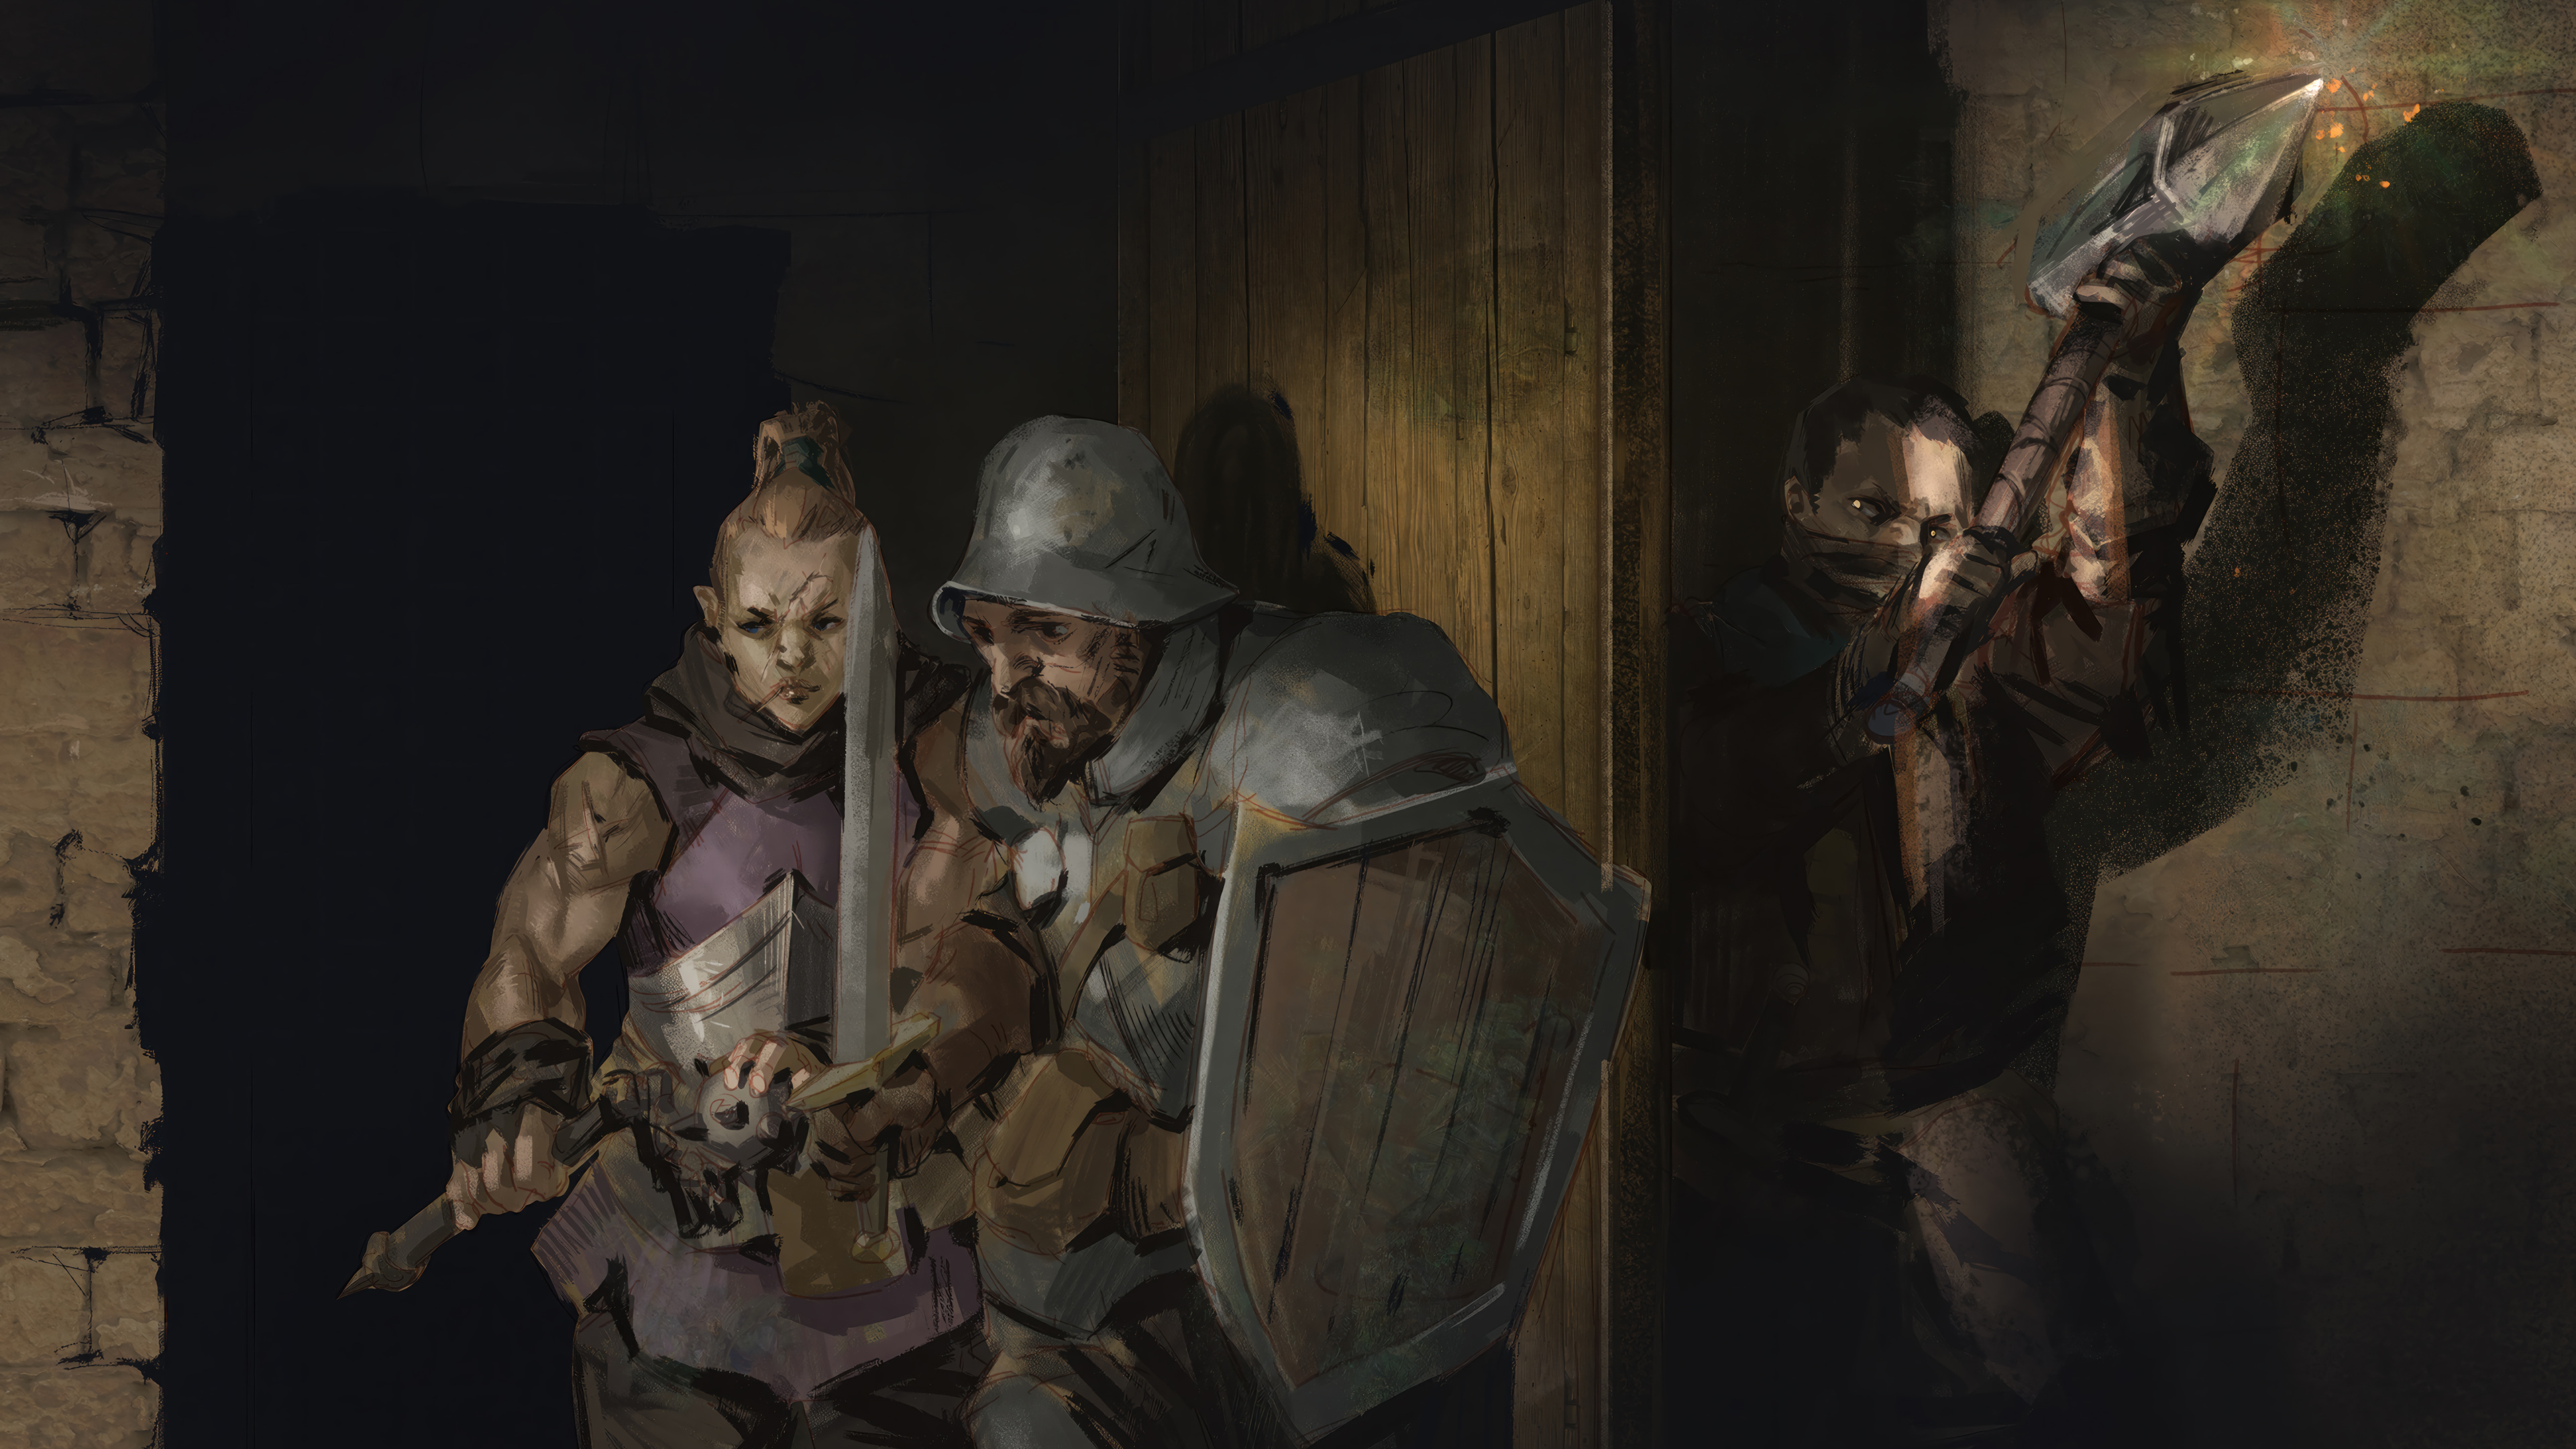 HD desktop wallpaper featuring fantasy characters from the game 'Dark and Darker' poised for battle in a dimly lit corridor, perfect for a dark-themed background.